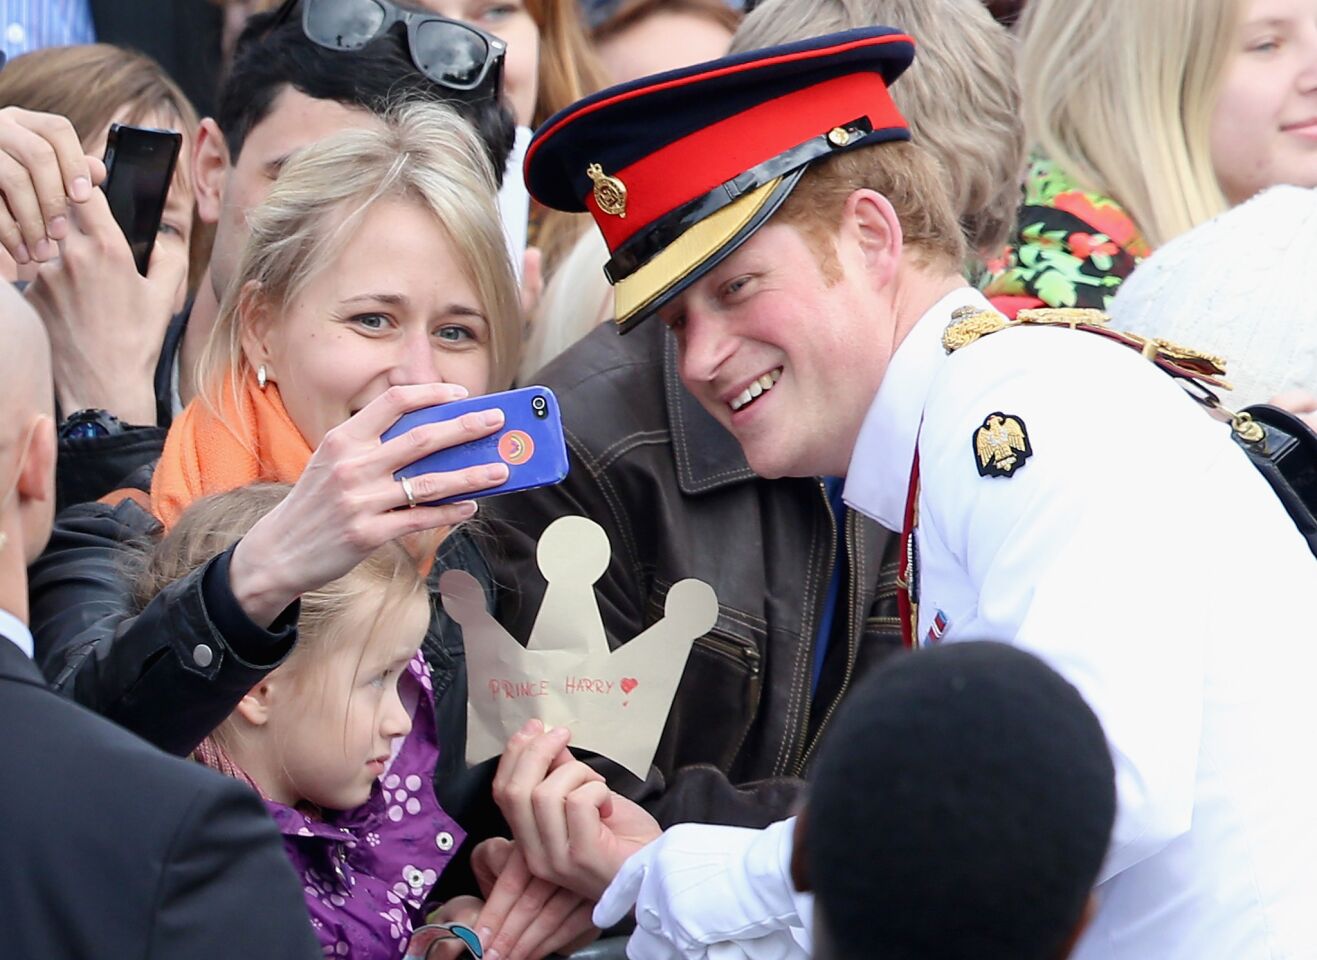 A member of the public takes a selfie with Prince Harry as he meets locals in Freedom Square on May 16, 2014, in Tallinn, Estonia.